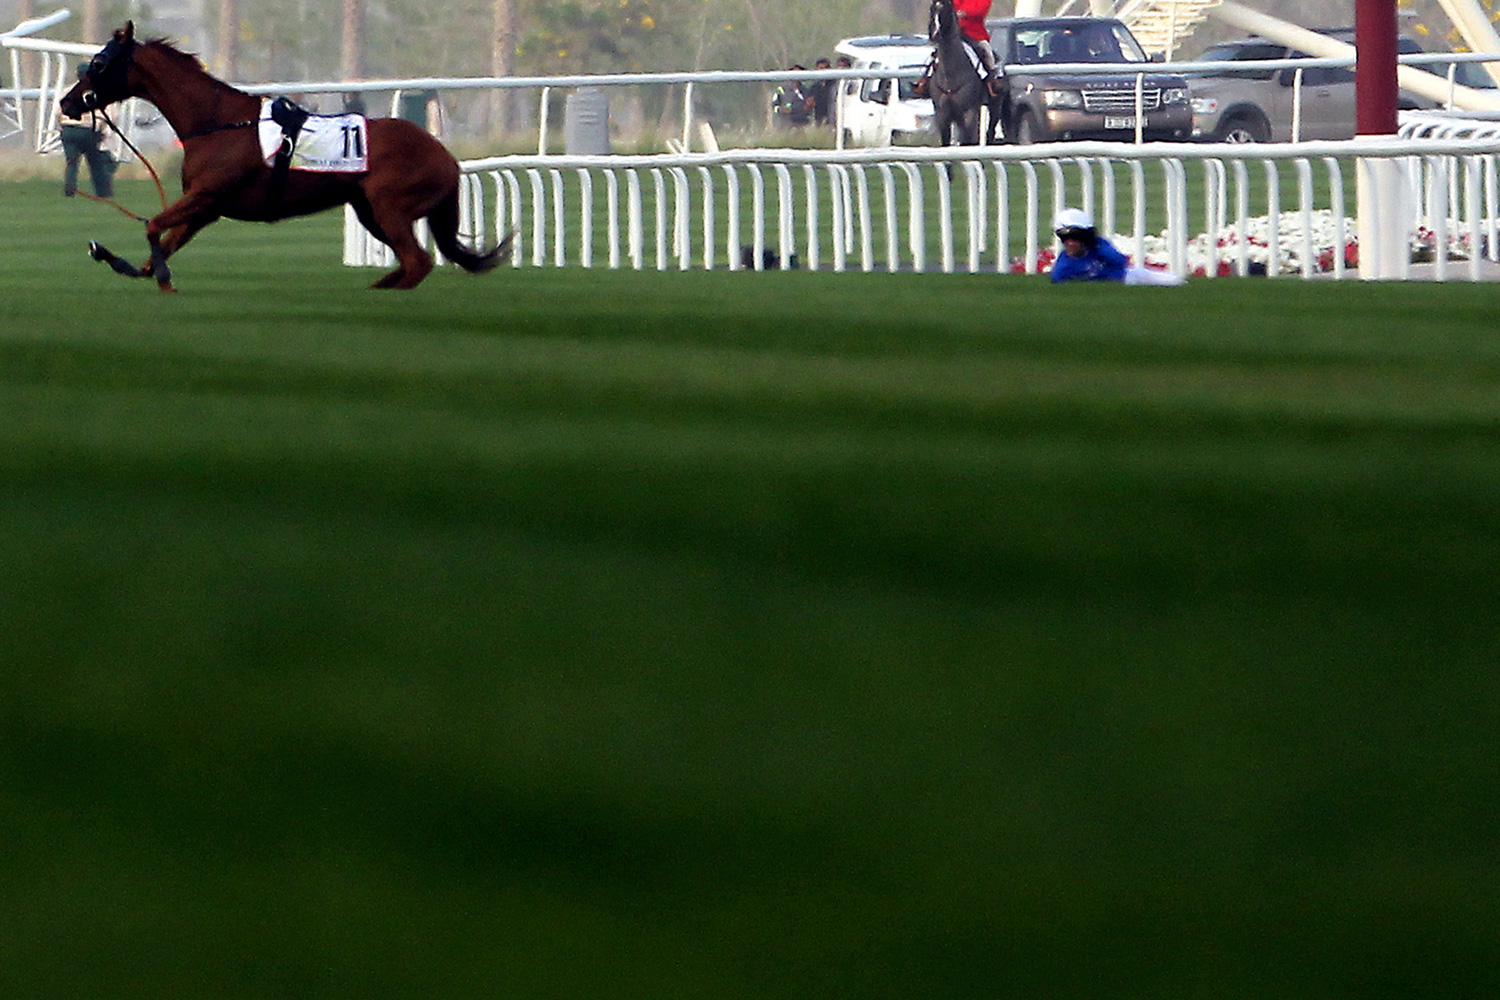 March 31, 2012. Fox Hunt, left, reacts in pain after falling with Brazilian jockey Silvestre De Sousa during the Dubai Gold Cup race at the Dubai World Cup, the world's richest horse race with prize money of $10 million U.S., at the Meydan race track in the Gulf emirate.